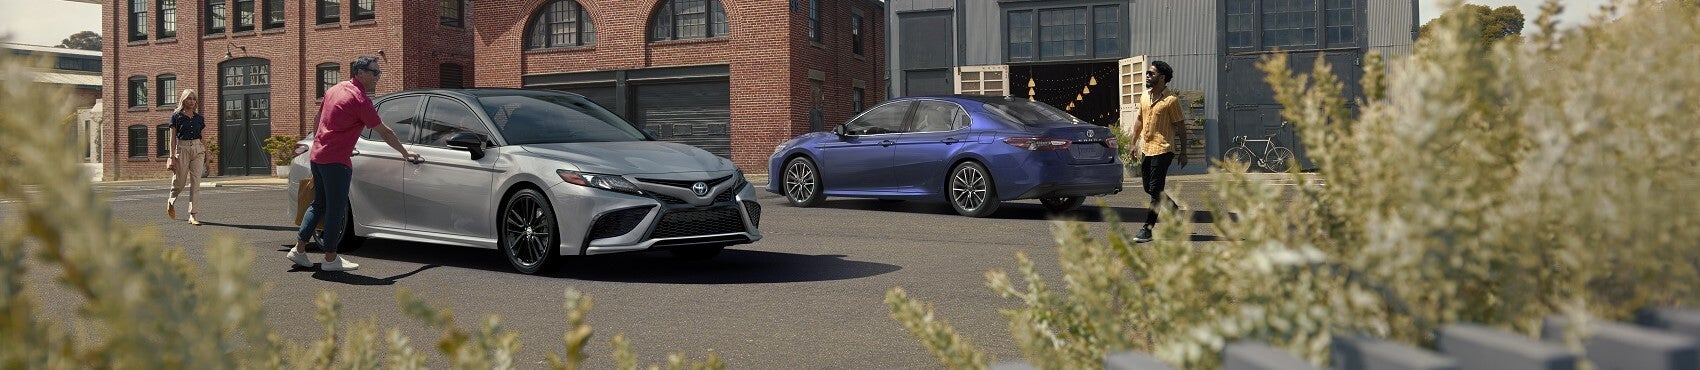 2022 Toyota Camrys parked next to each other